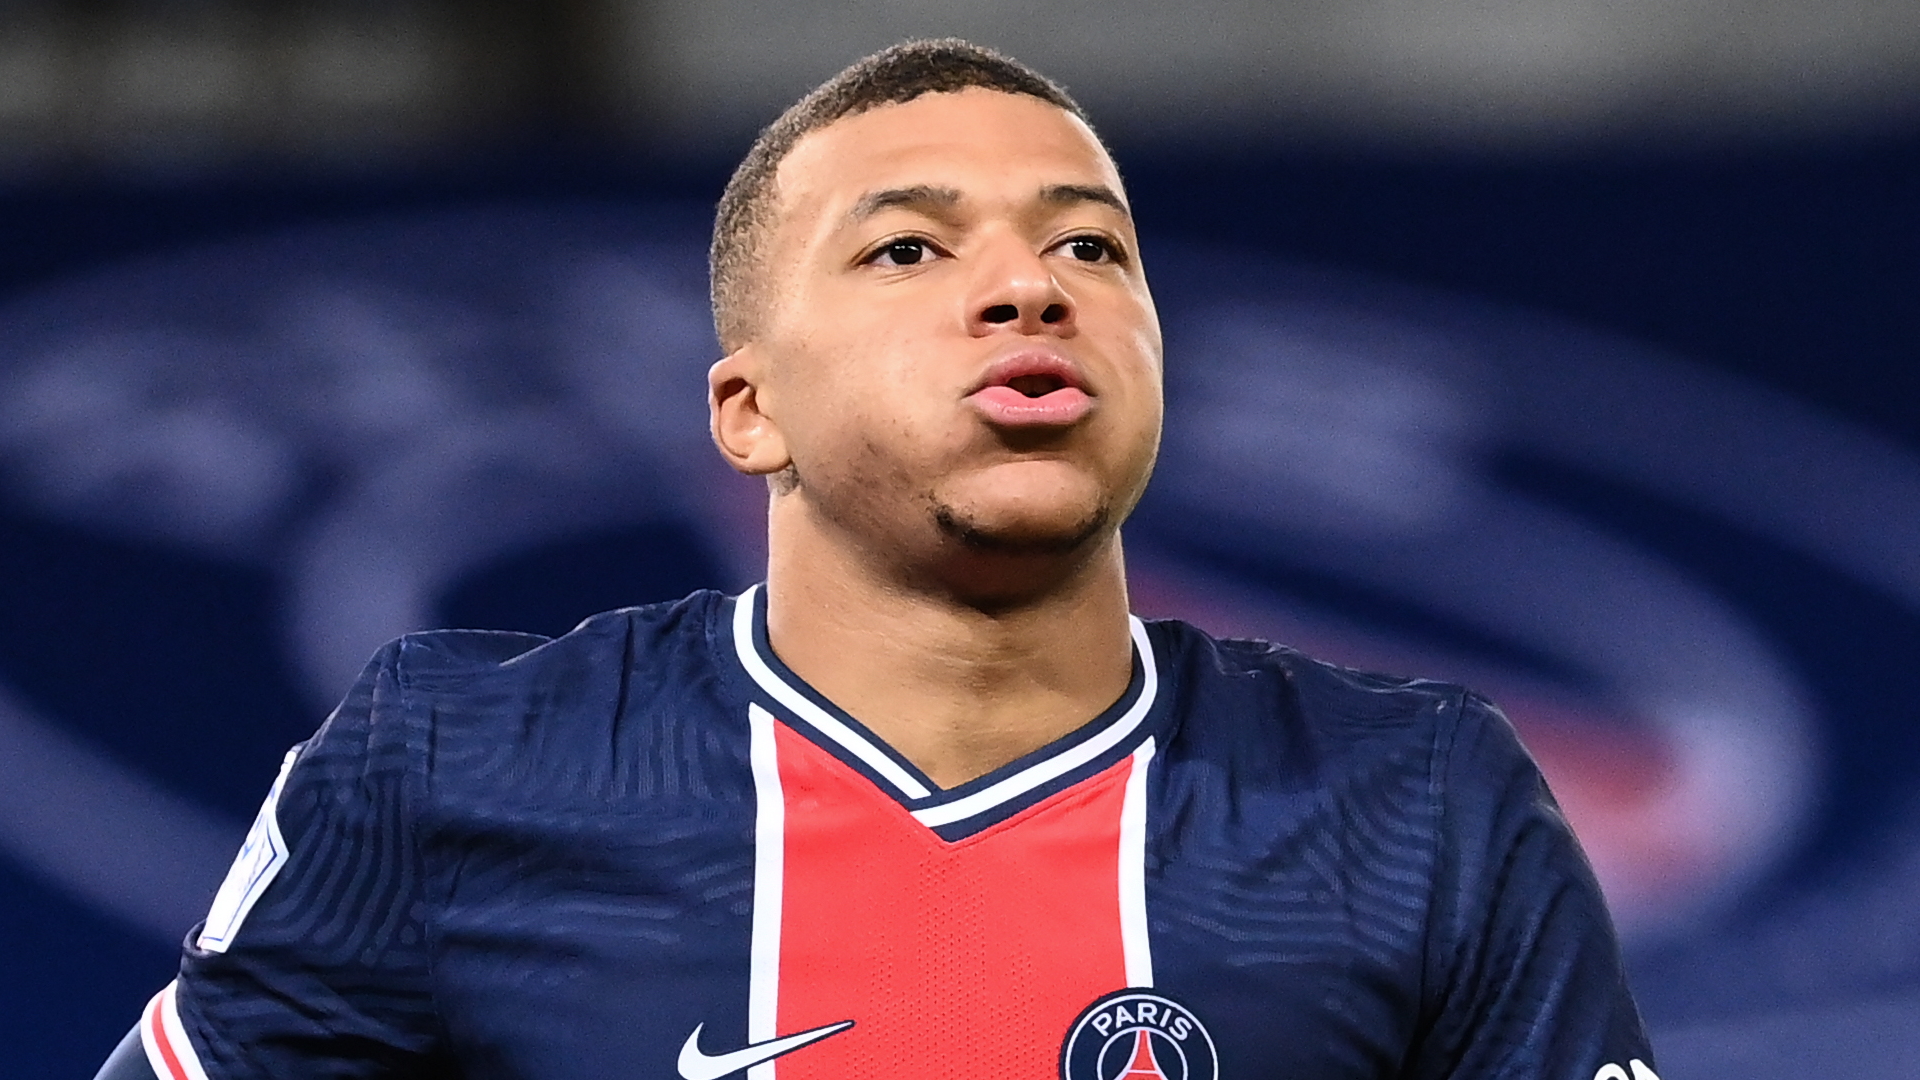 Mbappe an injury doubt for Champions League as PSG star sits out ...